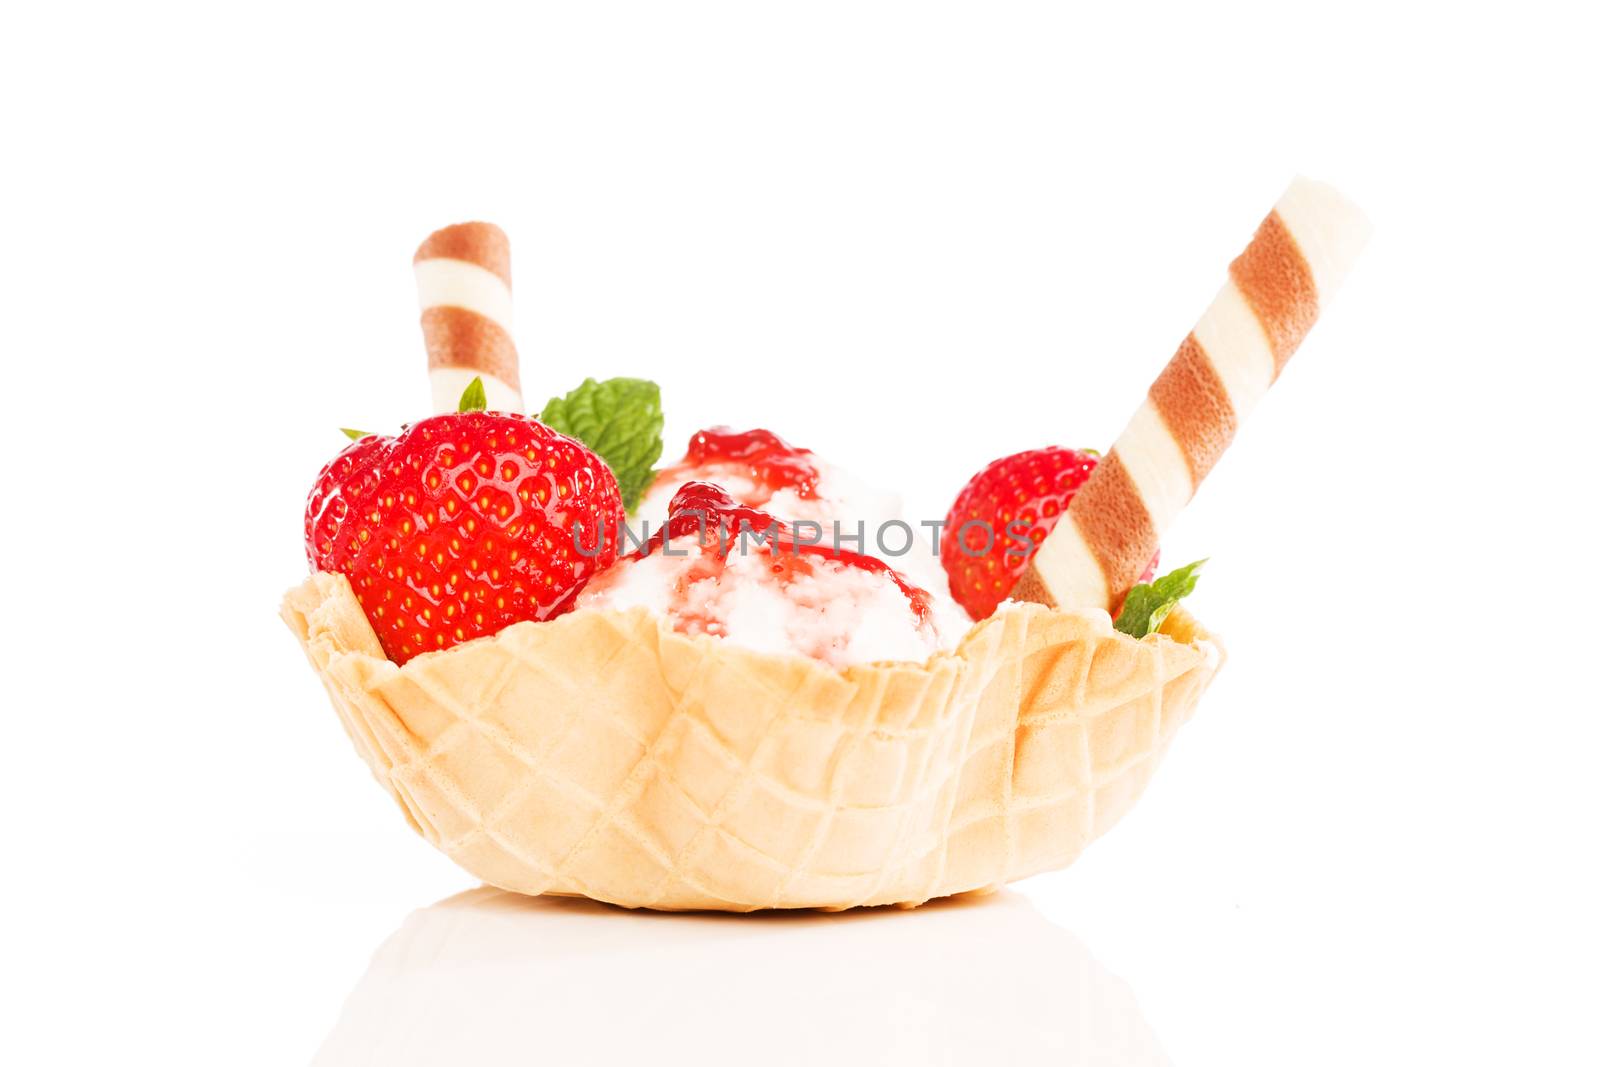 vanilla ice cream with strawberries in a waffle cup by RobStark